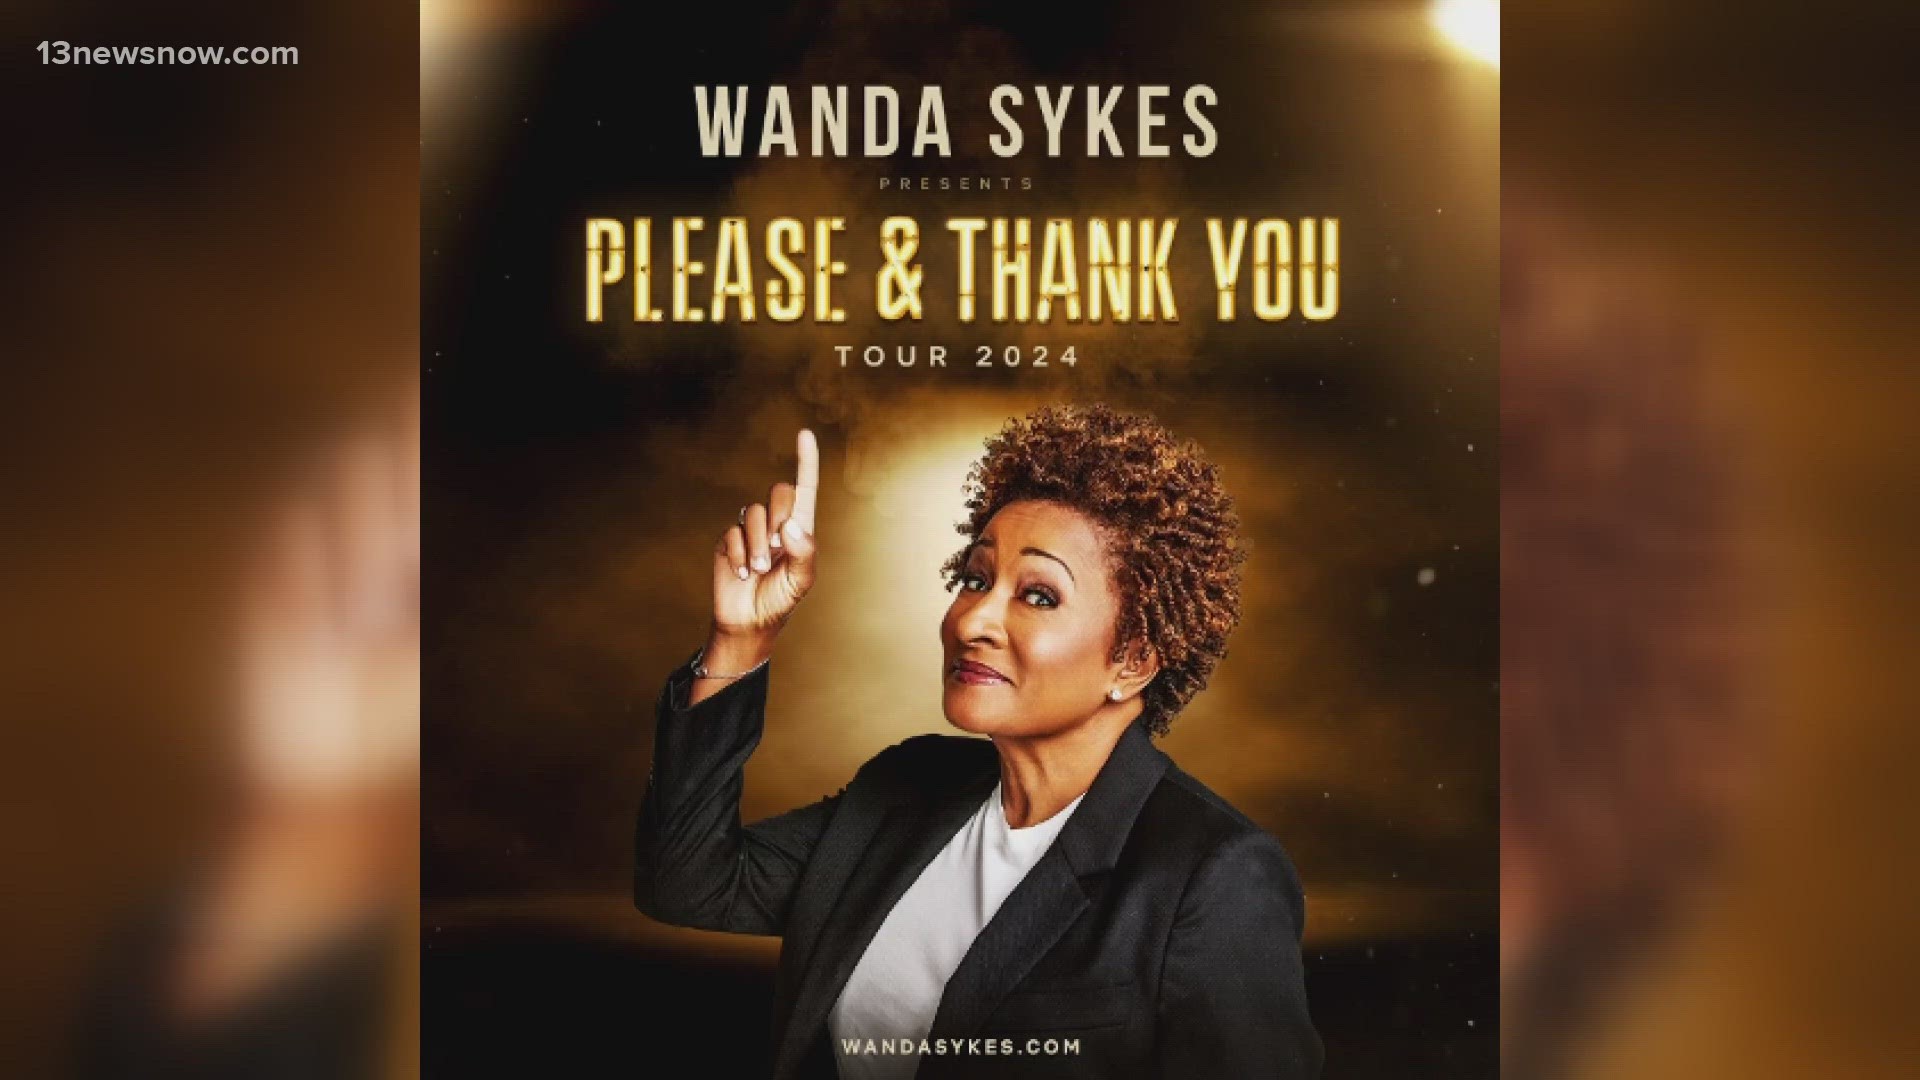 Wanda Sykes Tour 2024 Get Your Tickets Now!